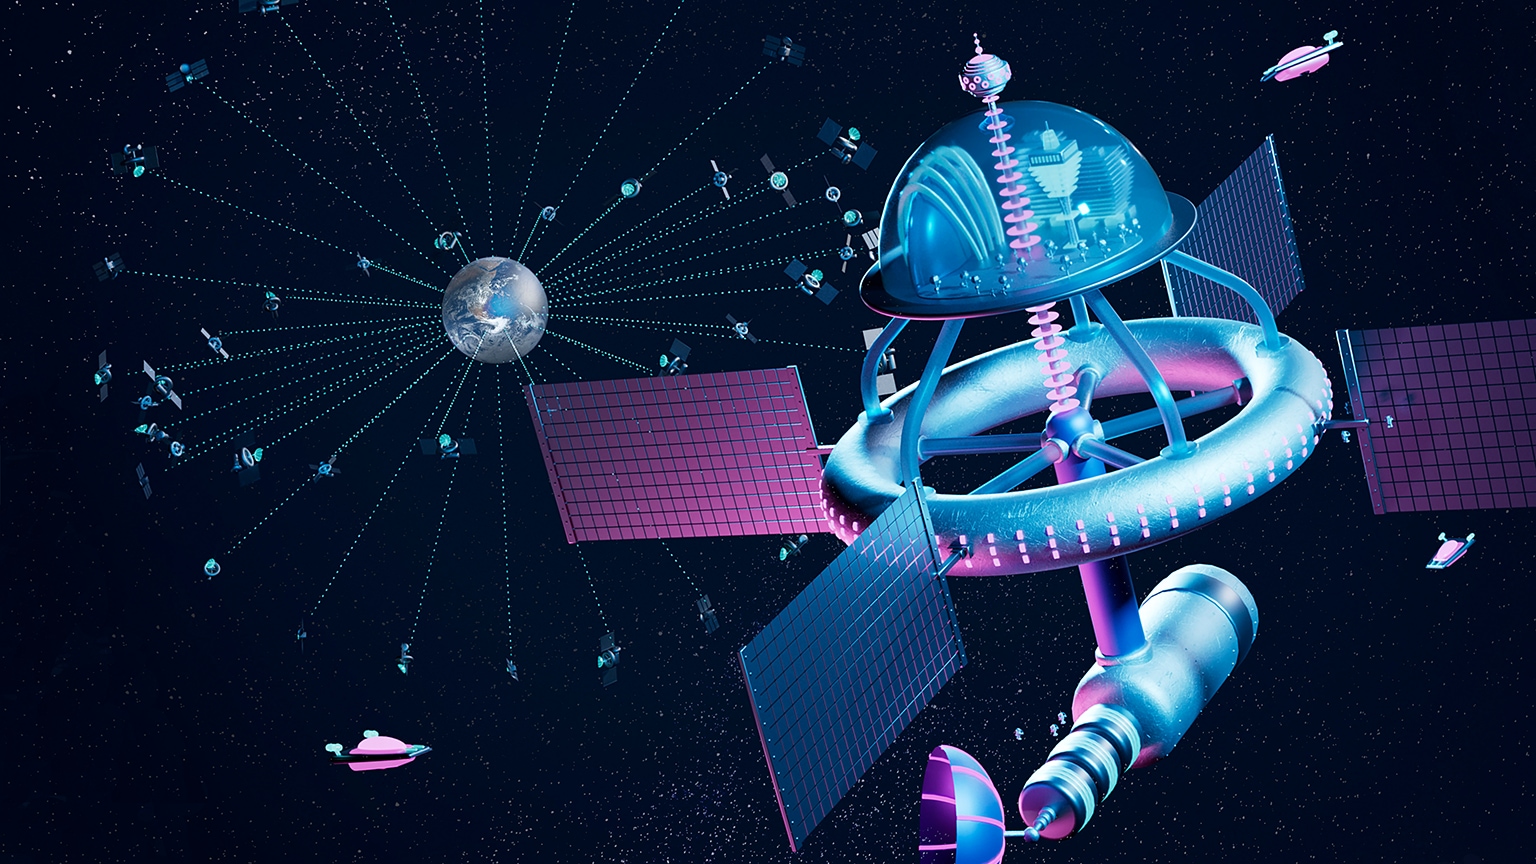 An image linking to the web page “How will the space economy change the world?” on McKinsey.com.